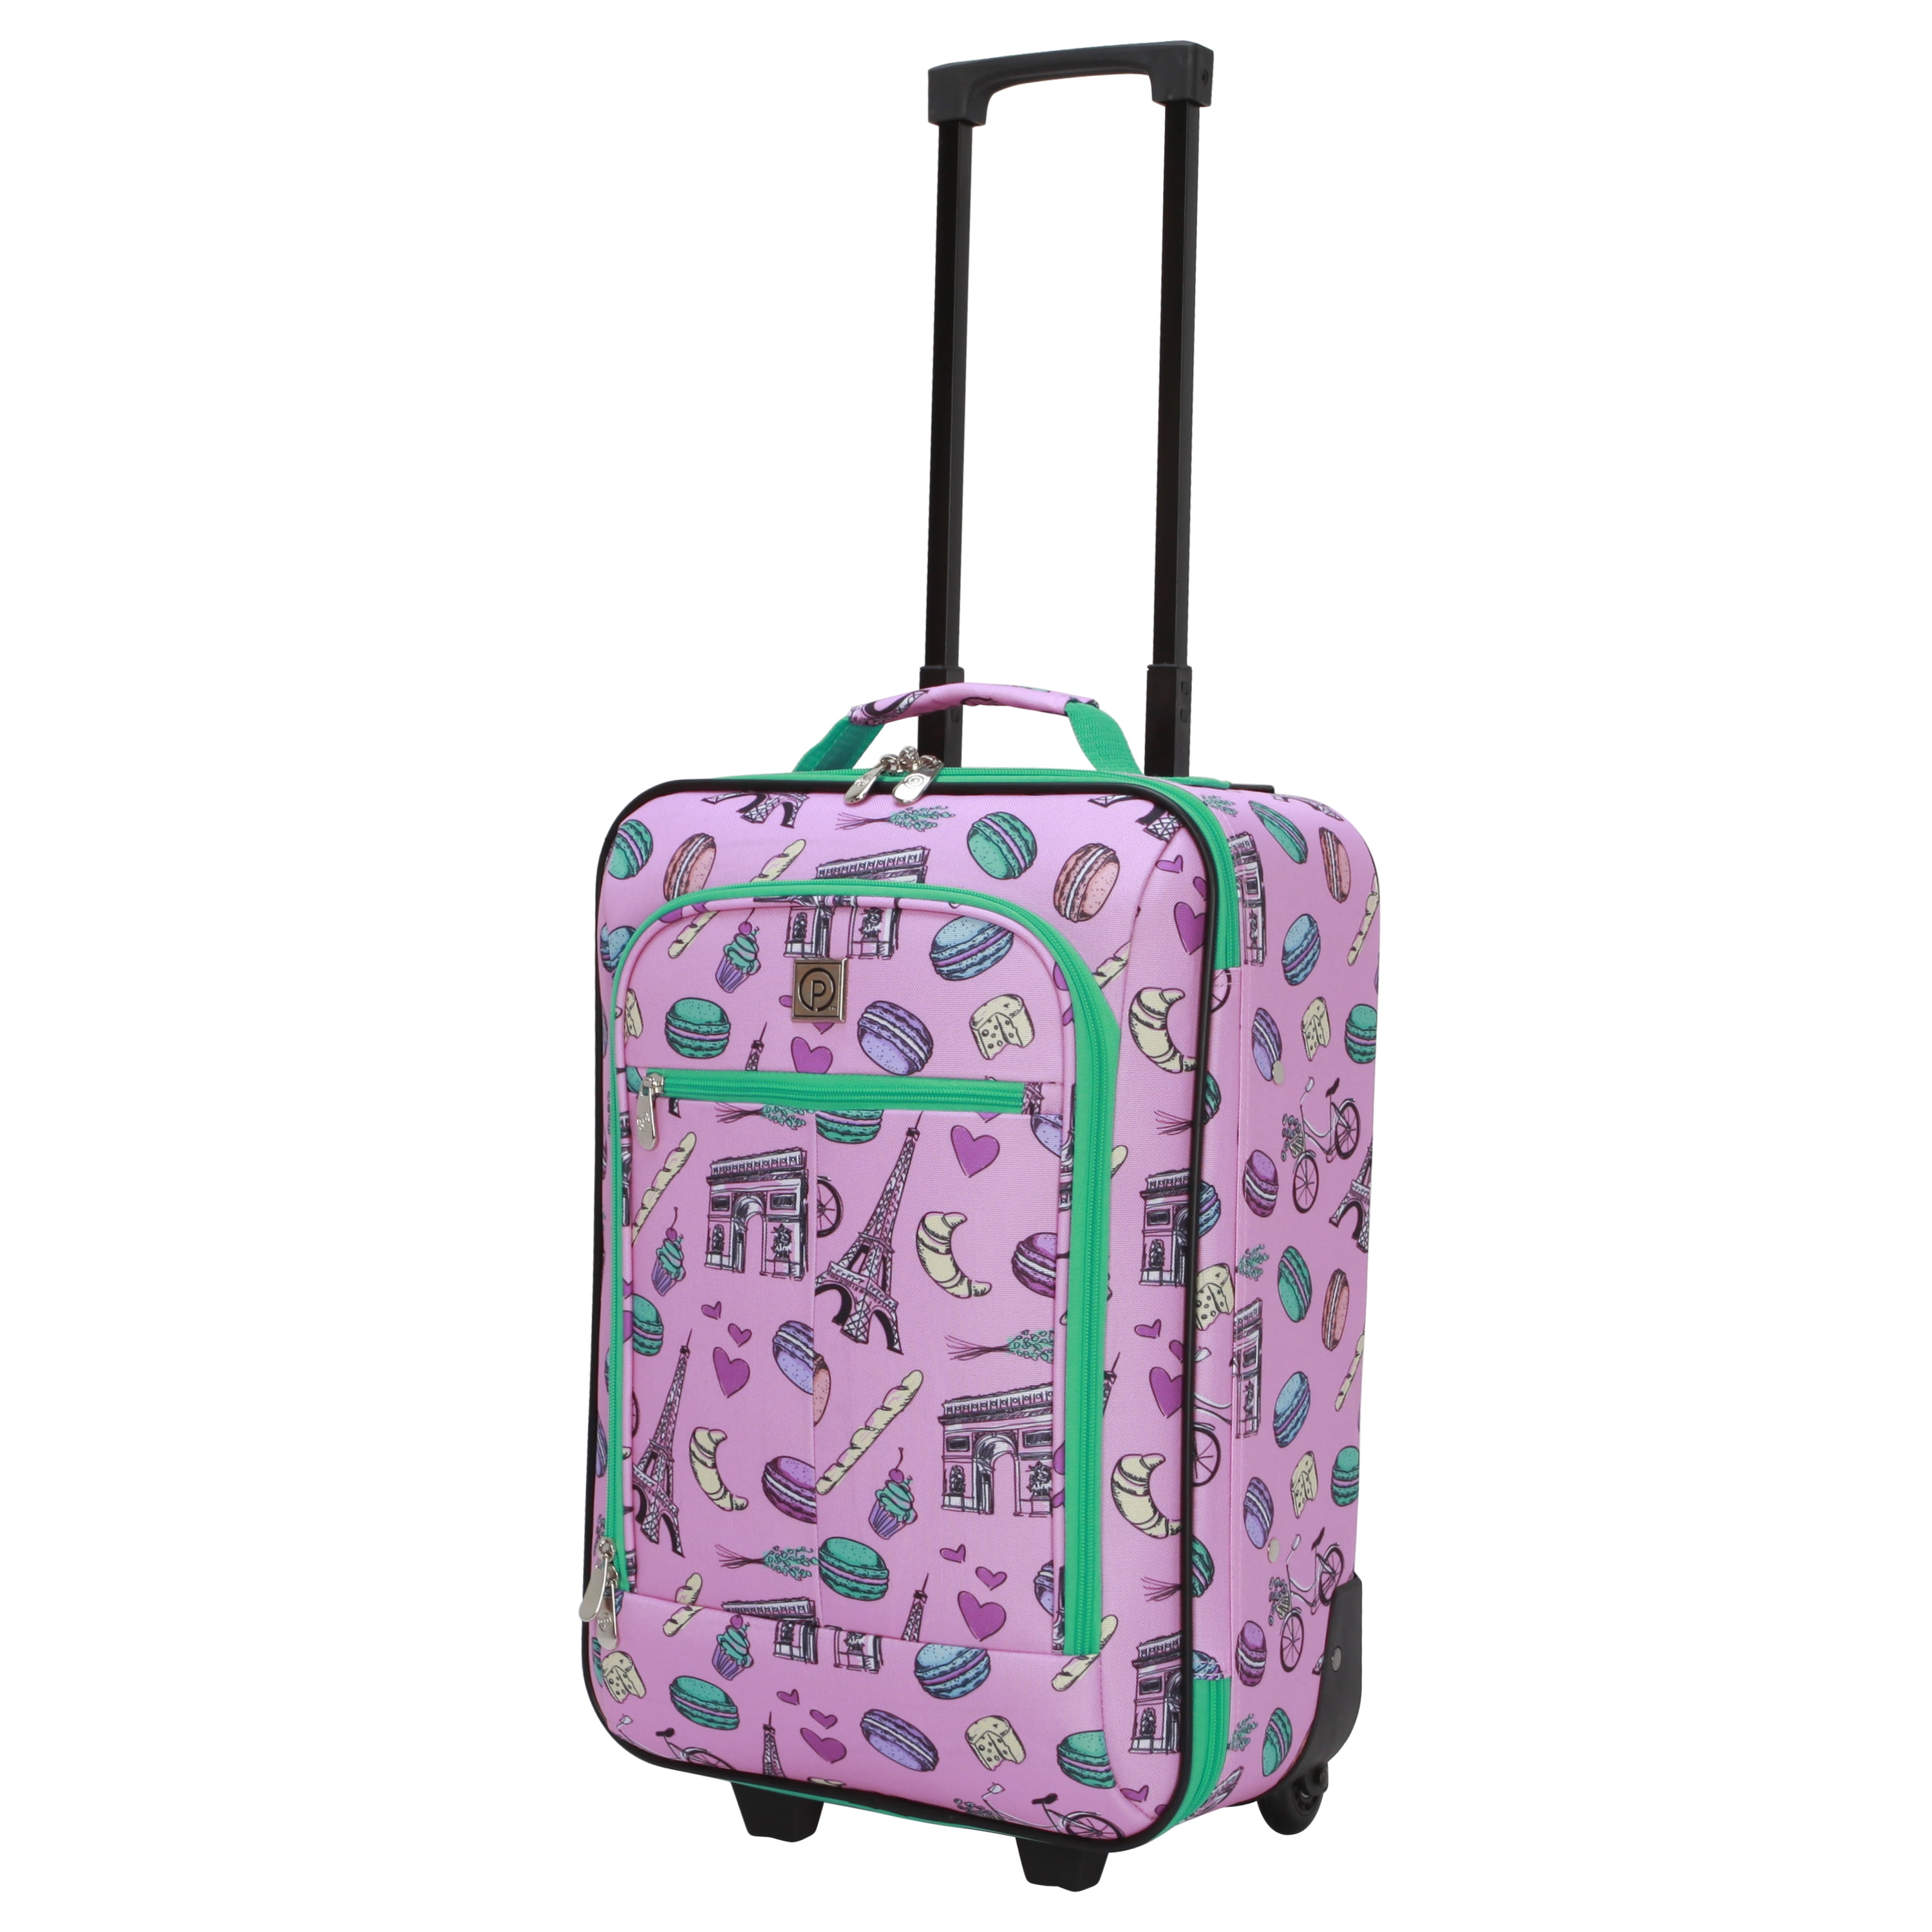 Protege Kids 18 inch Hardside Carry on Kids Luggage, Candy, ( Exclusive), Size: 7.88 Large x 12.8 W x 17.72 H